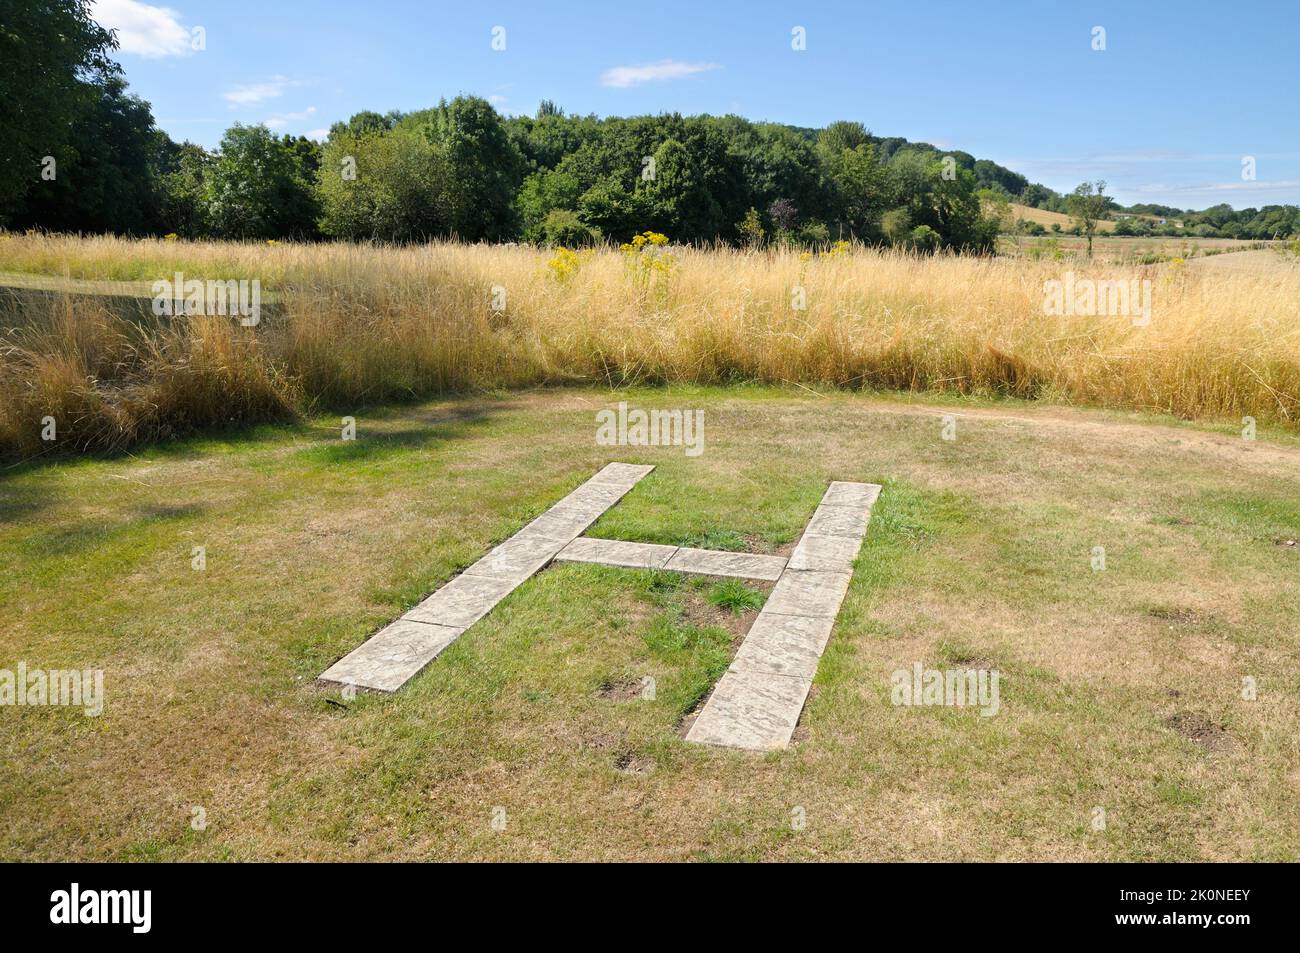 A helicopter landing pad (helipad) marked out in the countryside where a single helicopter can take off or land, denoted by a letter 'H'. Stock Photo